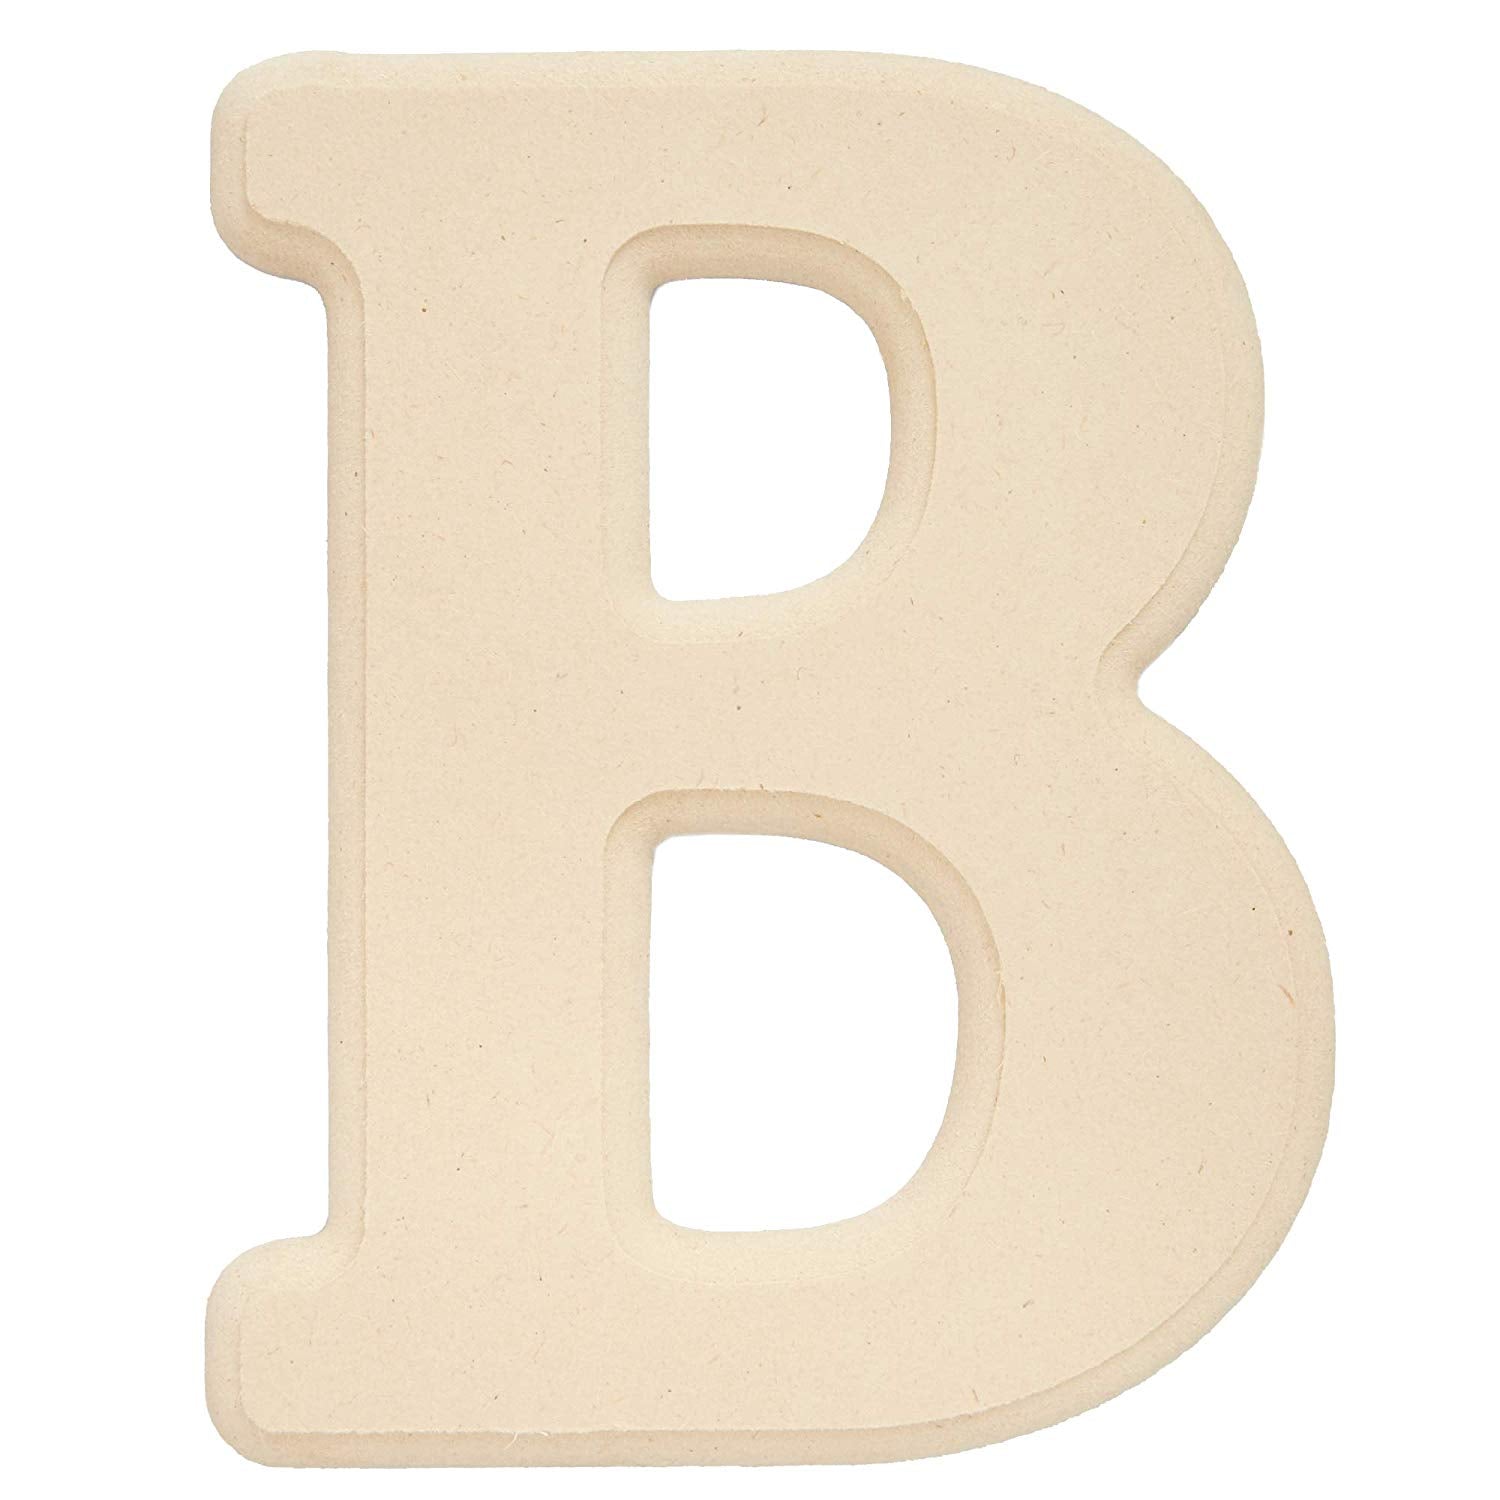 She Love 6 inch Wooden Letters 26Pcs Wooden Alphabet Letter for Crafts  Unfinished Wood Letters for Home Wall Decor Kids Arts Painting DIY Learning